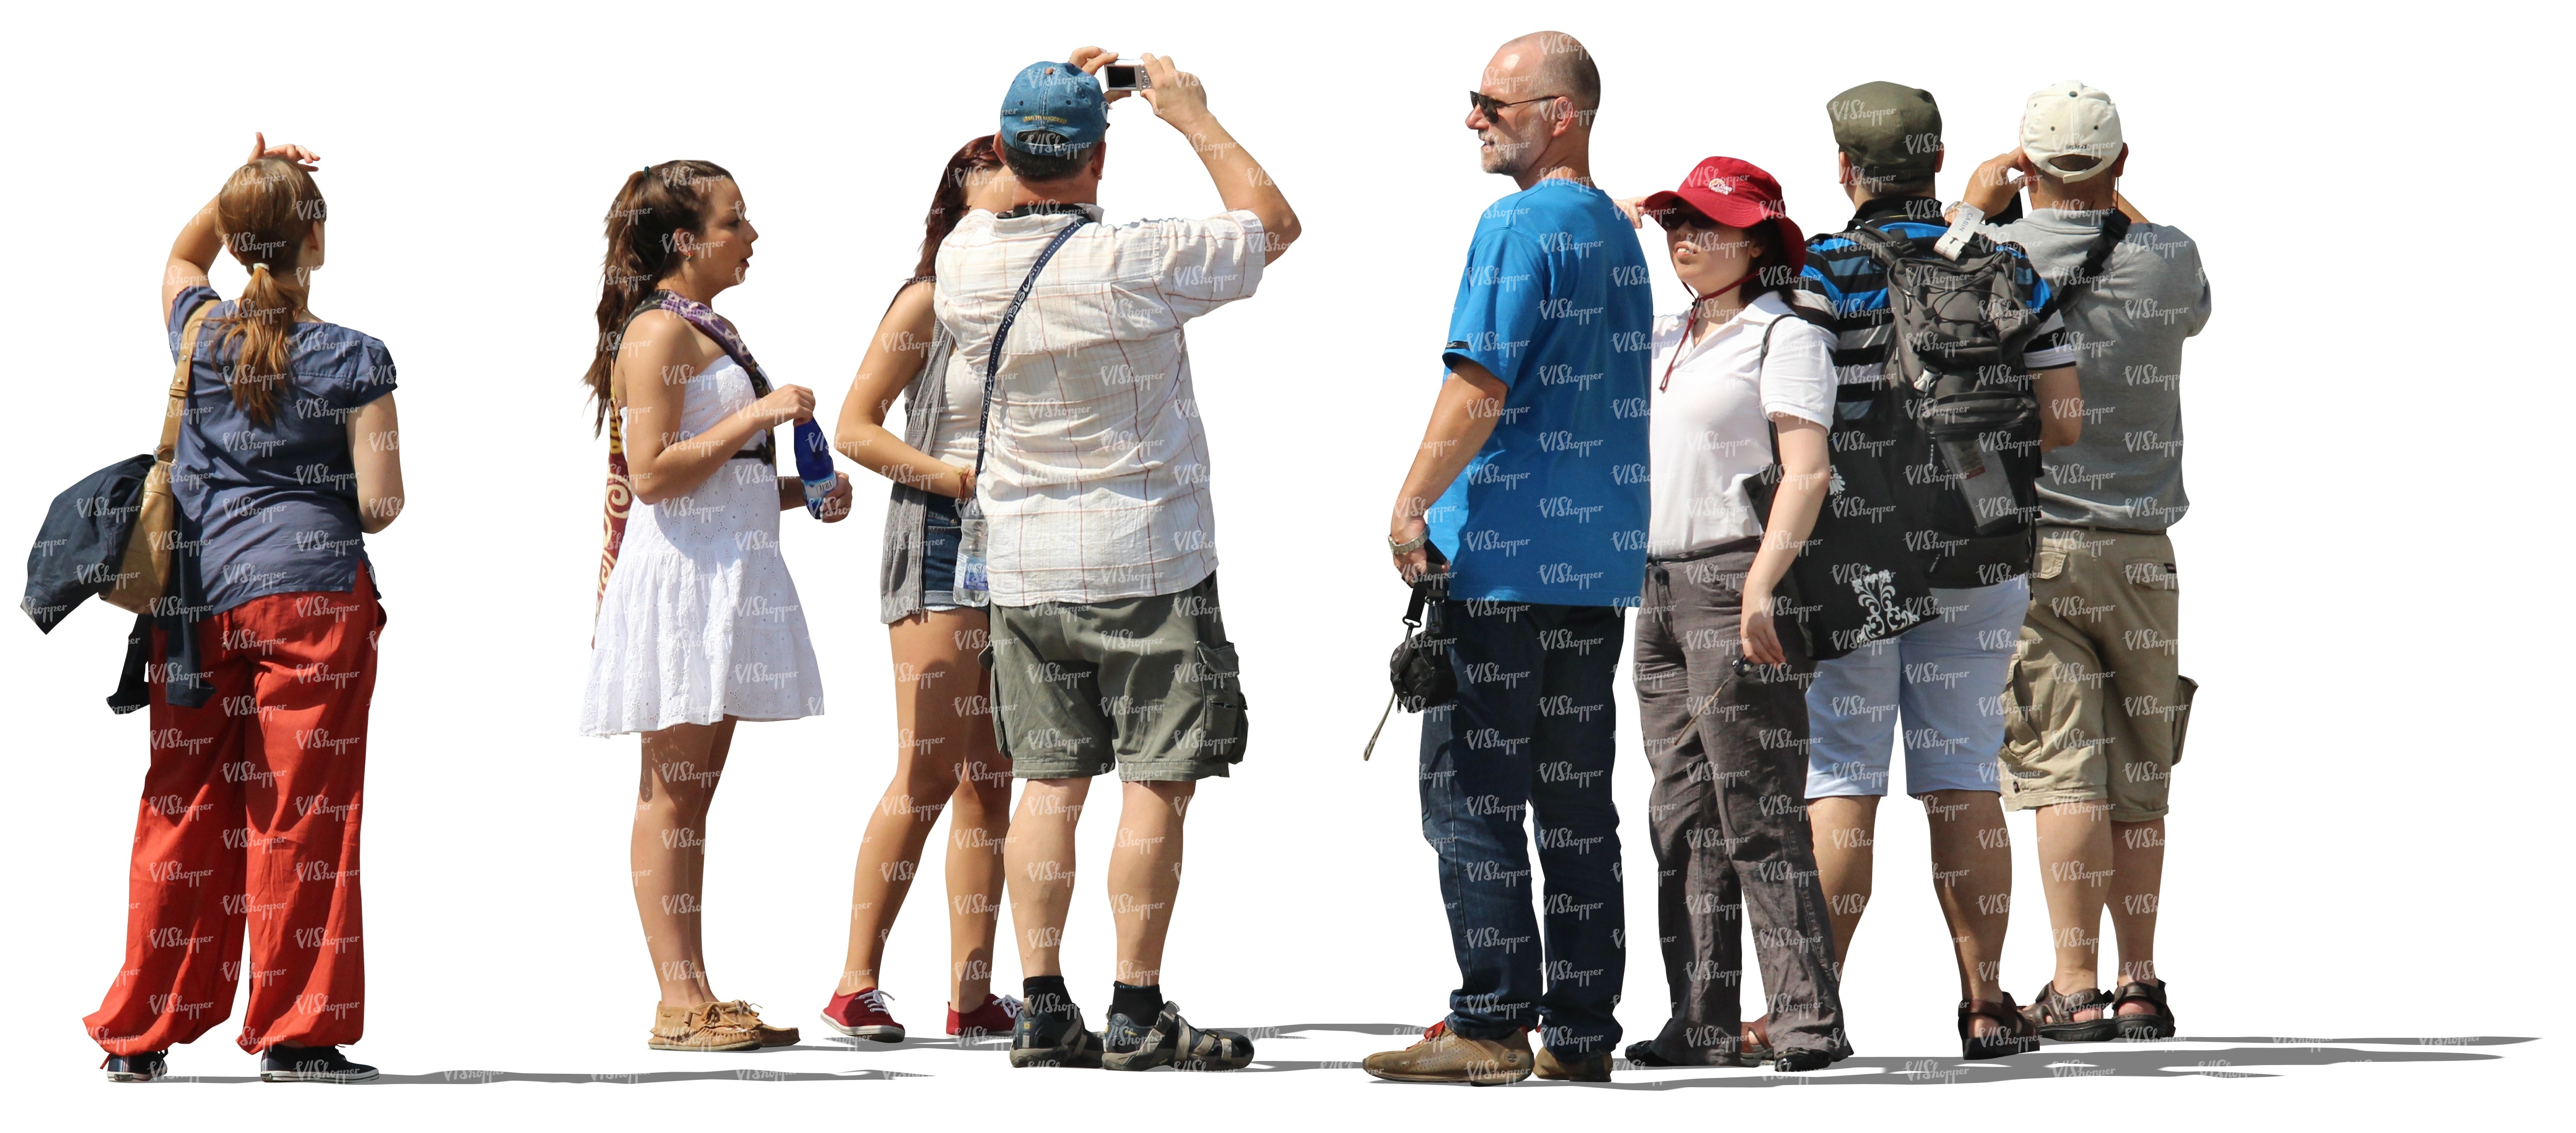 group of tourists standing - VIShopper